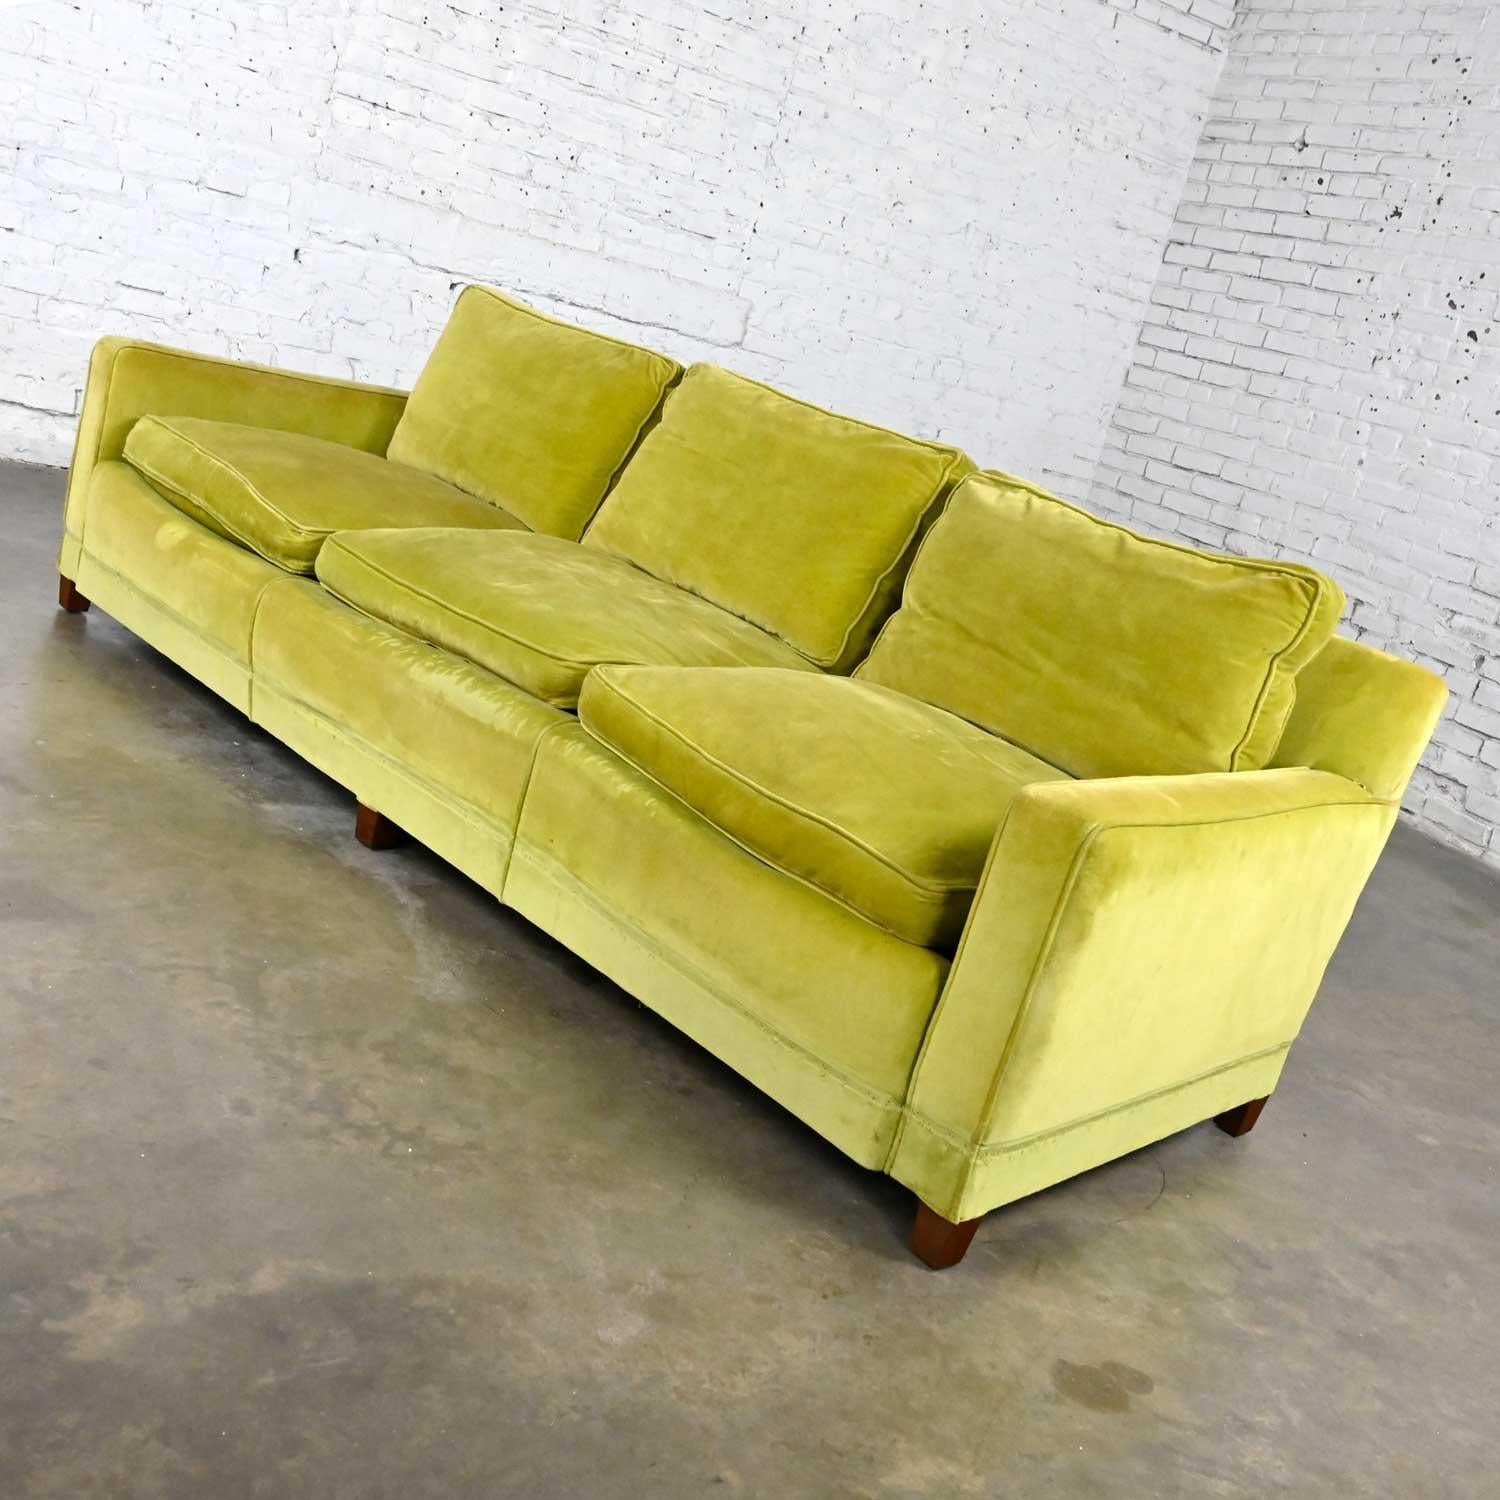 Gorgeous vintage mid-century modern chartreuse green velvet Lawson style sofa with squared tapered wood legs, feather down back cushions, and feather down wrapped spring seat cushions. Beautiful condition, keeping in mind that this is vintage and